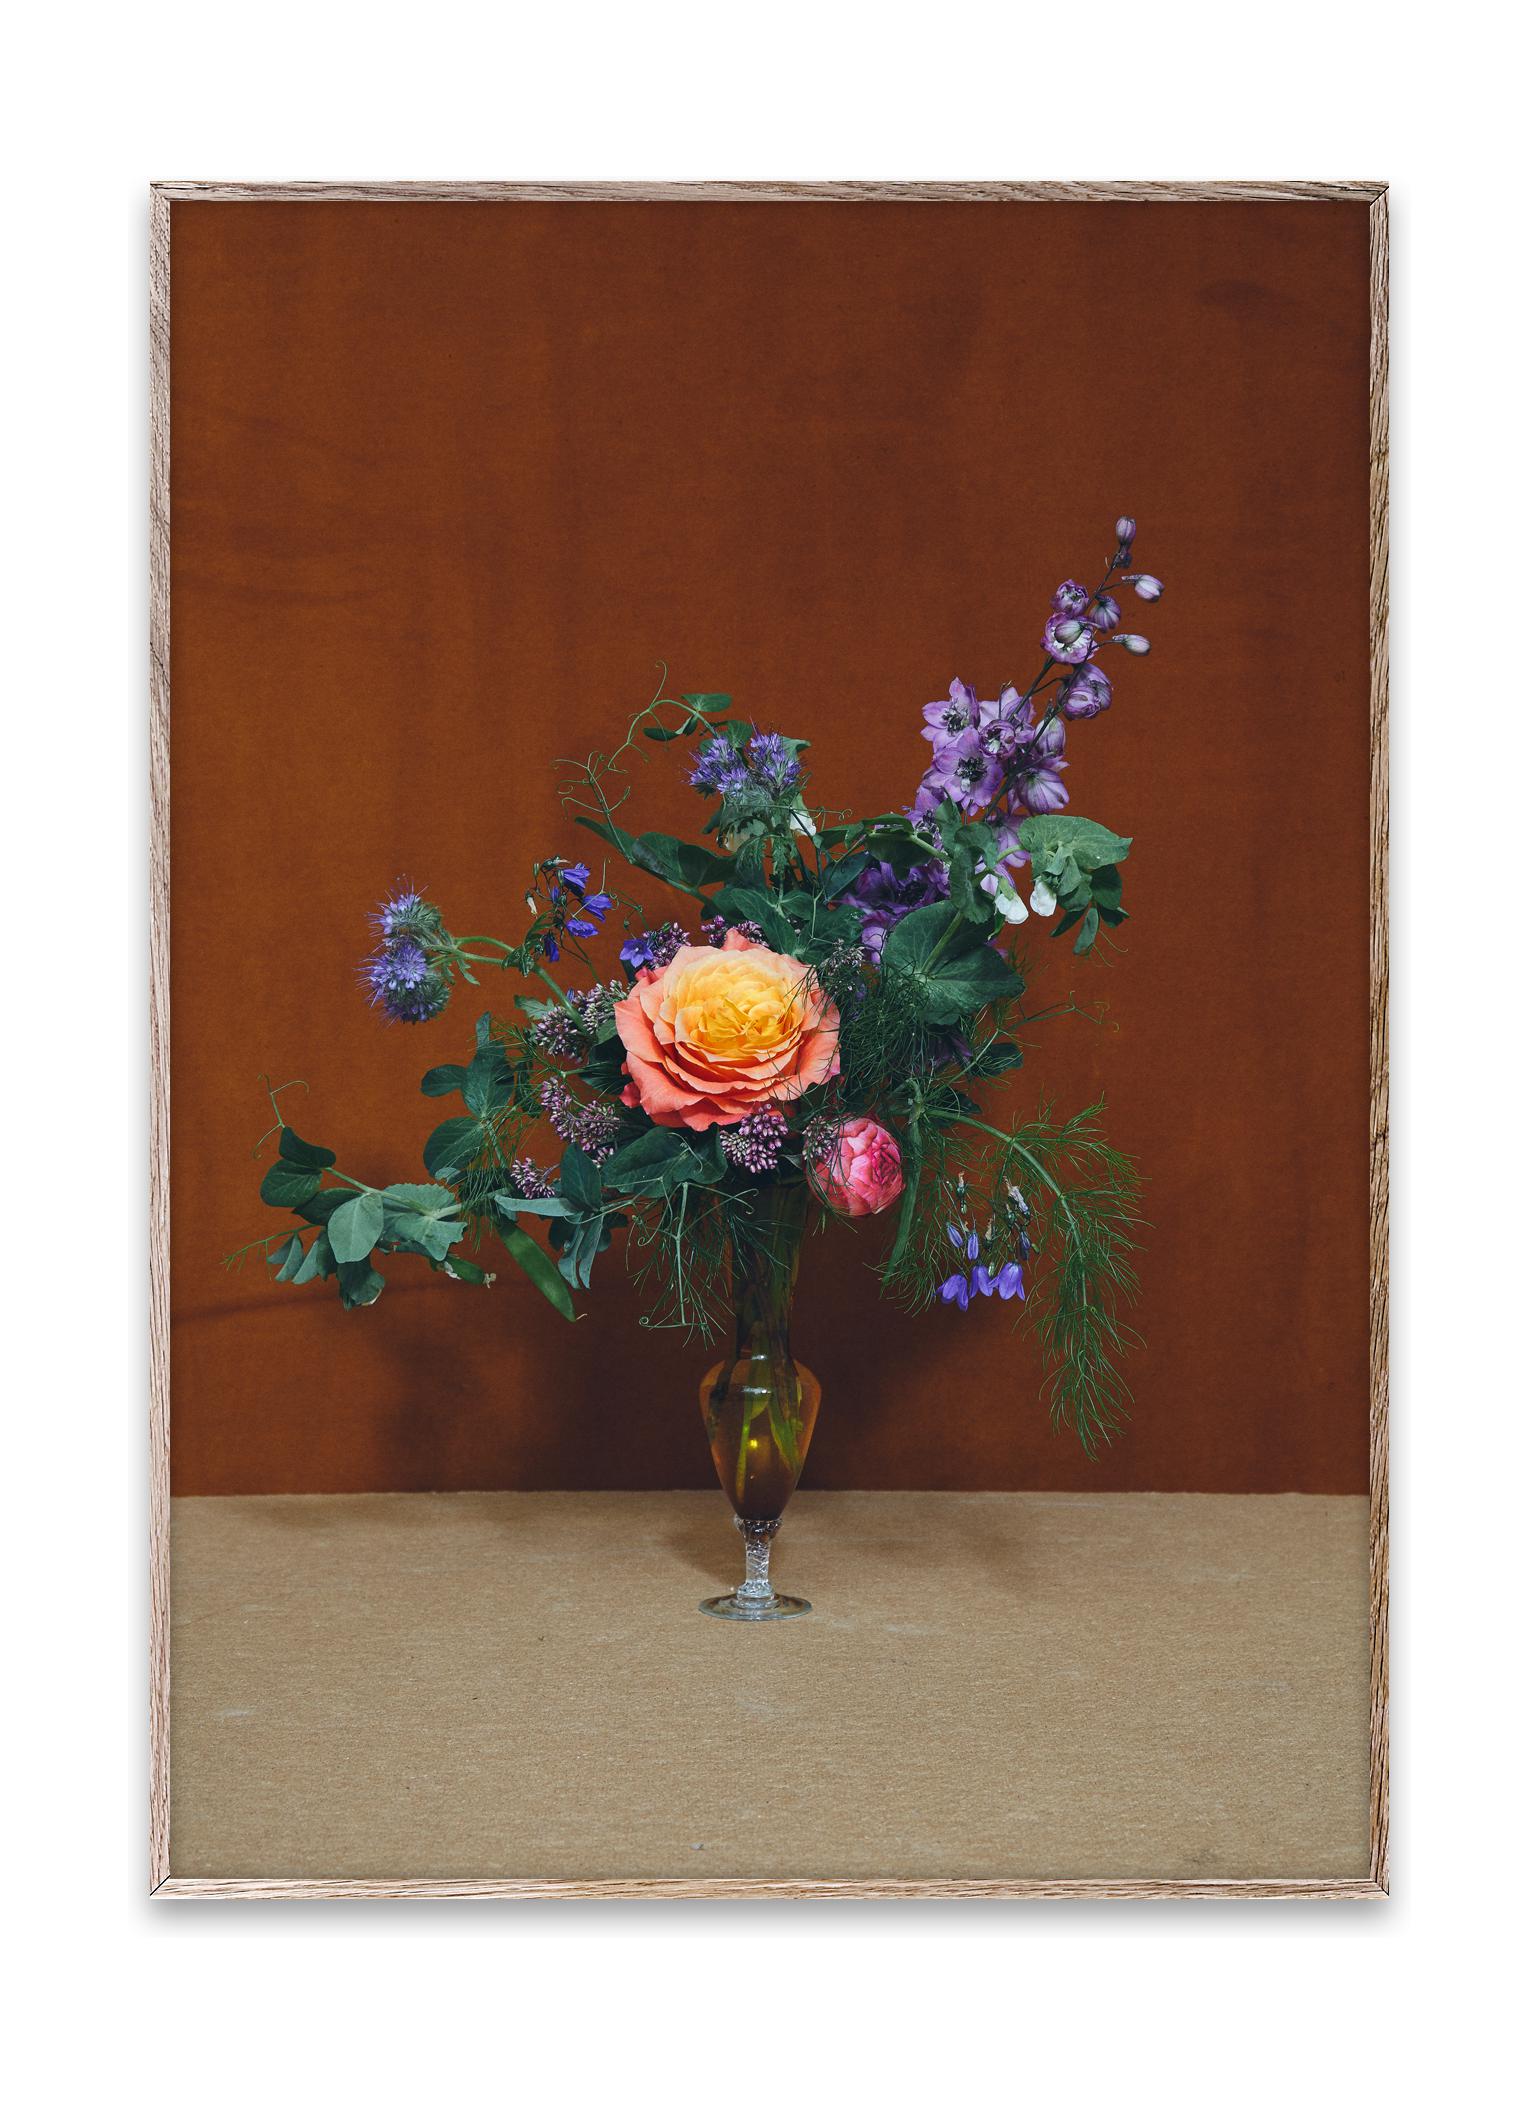 Paper Collective Blomst 08 Poster 50x70 Cm, Brown